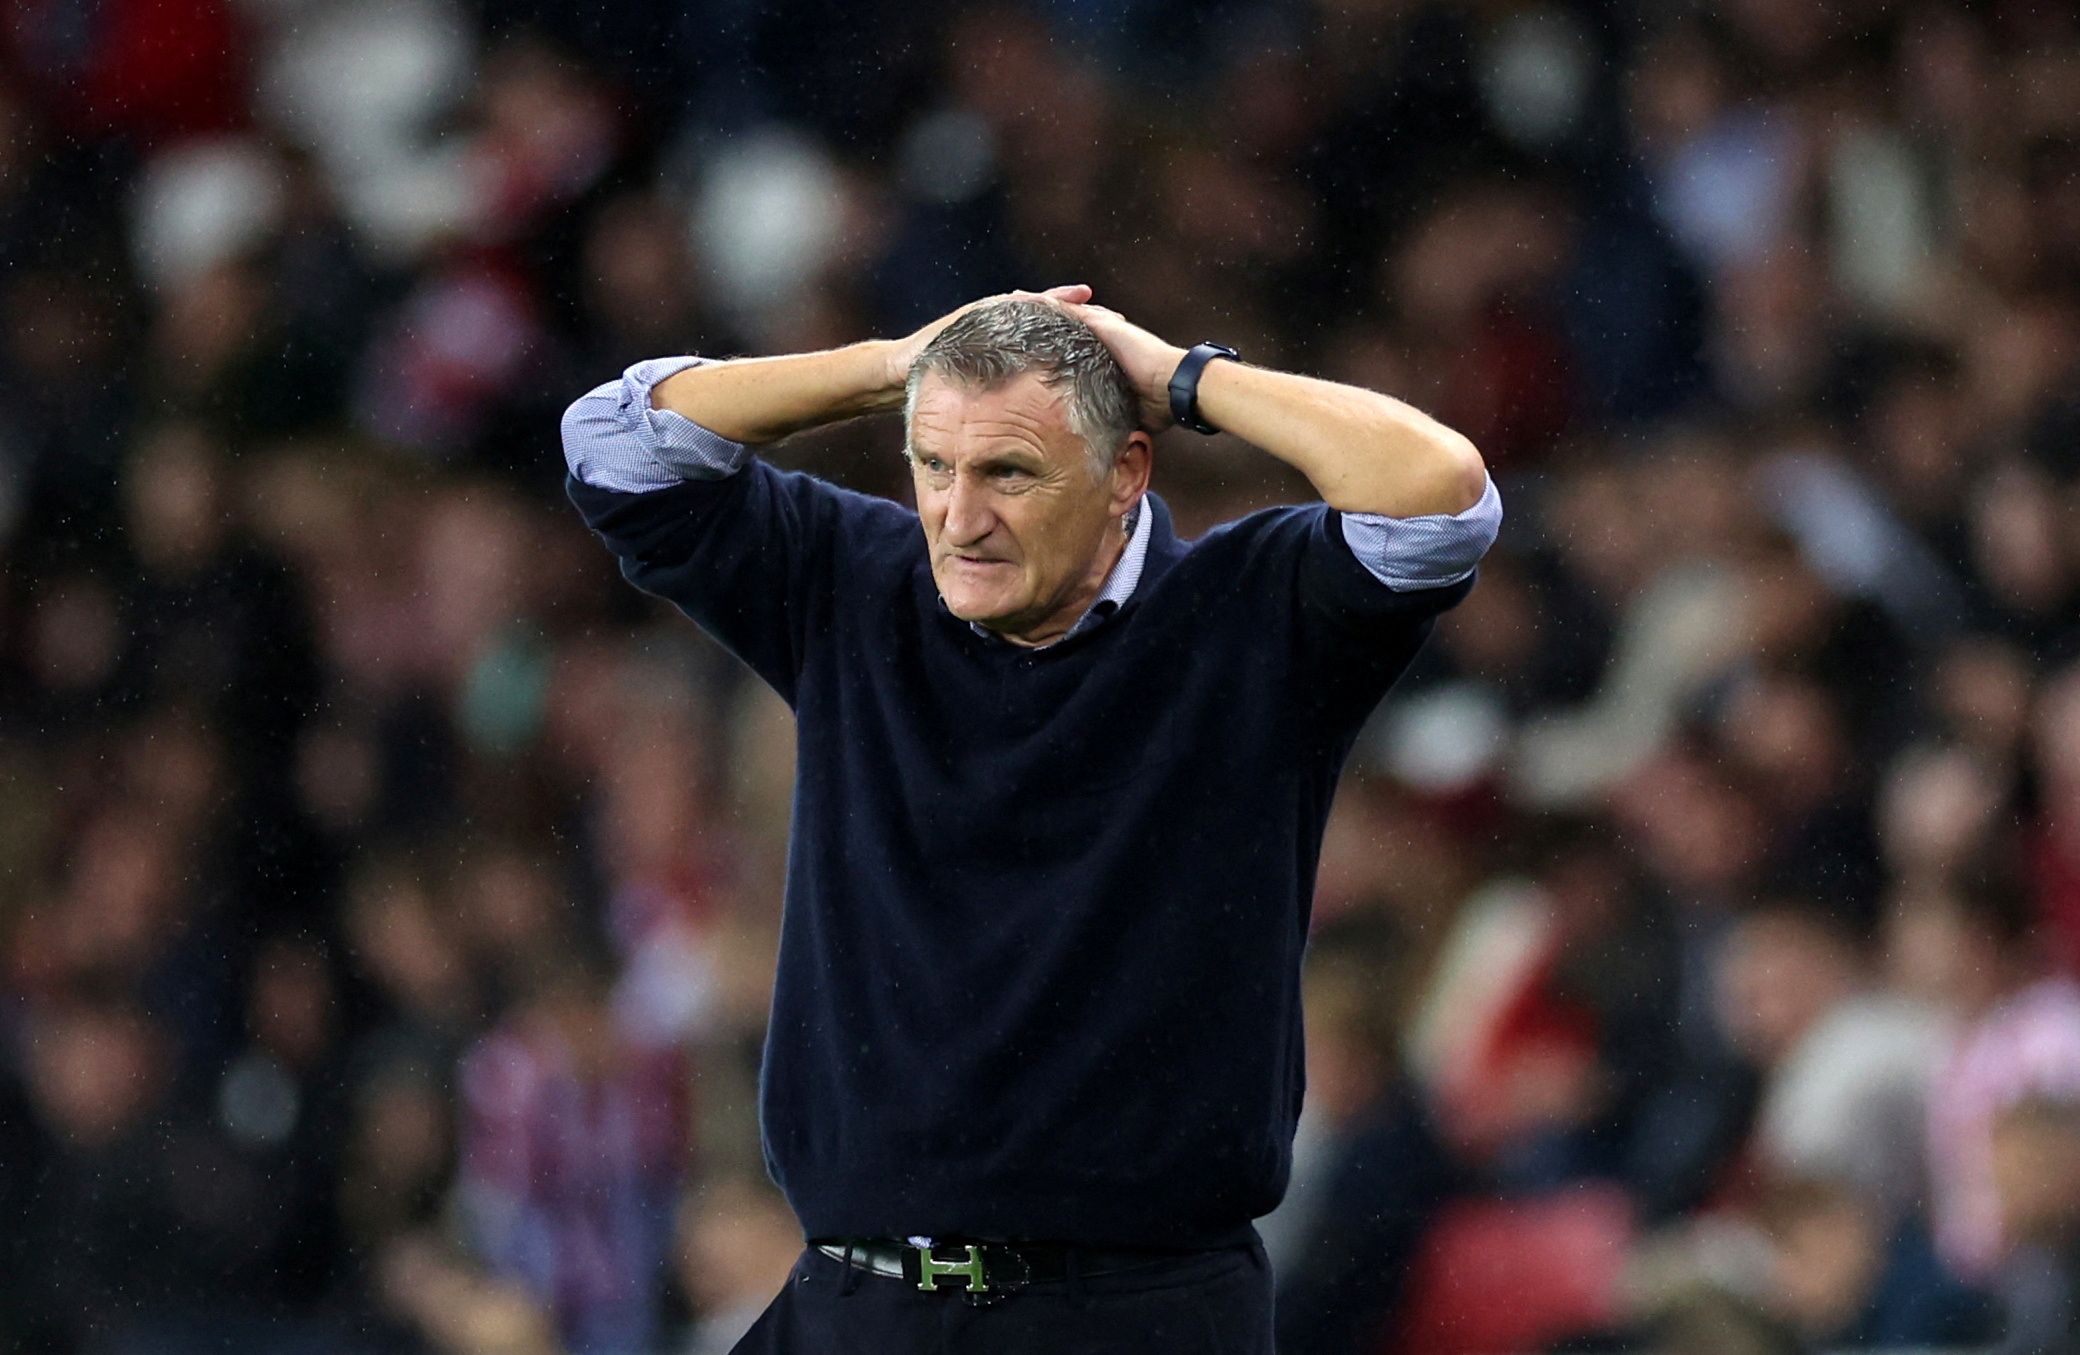 Soccer Football - Championship - Sunderland v Blackpool - Stadium of Light, Sunderland, Britain - October 4, 2022  Sunderland manager Tony Mowbray during the match  Action Images/Lee Smith  EDITORIAL USE ONLY. No use with unauthorized audio, video, data, fixture lists, club/league logos or 